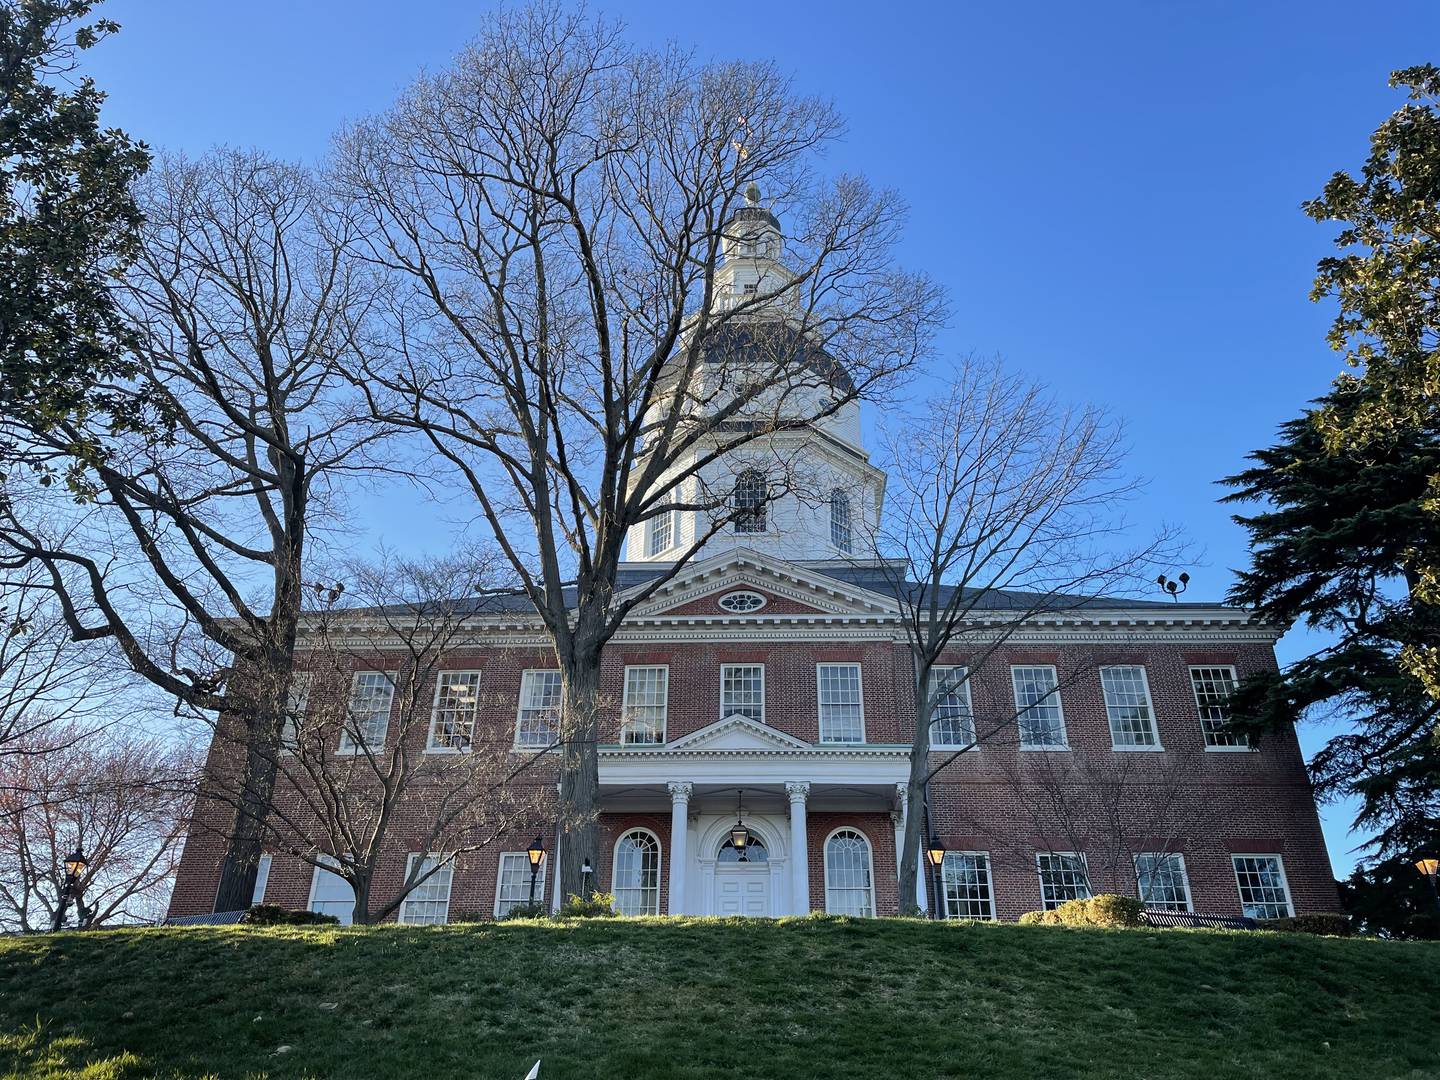 The Maryland State House in Annapolis is the oldest state capital building in the nation still in continuous legislative use.